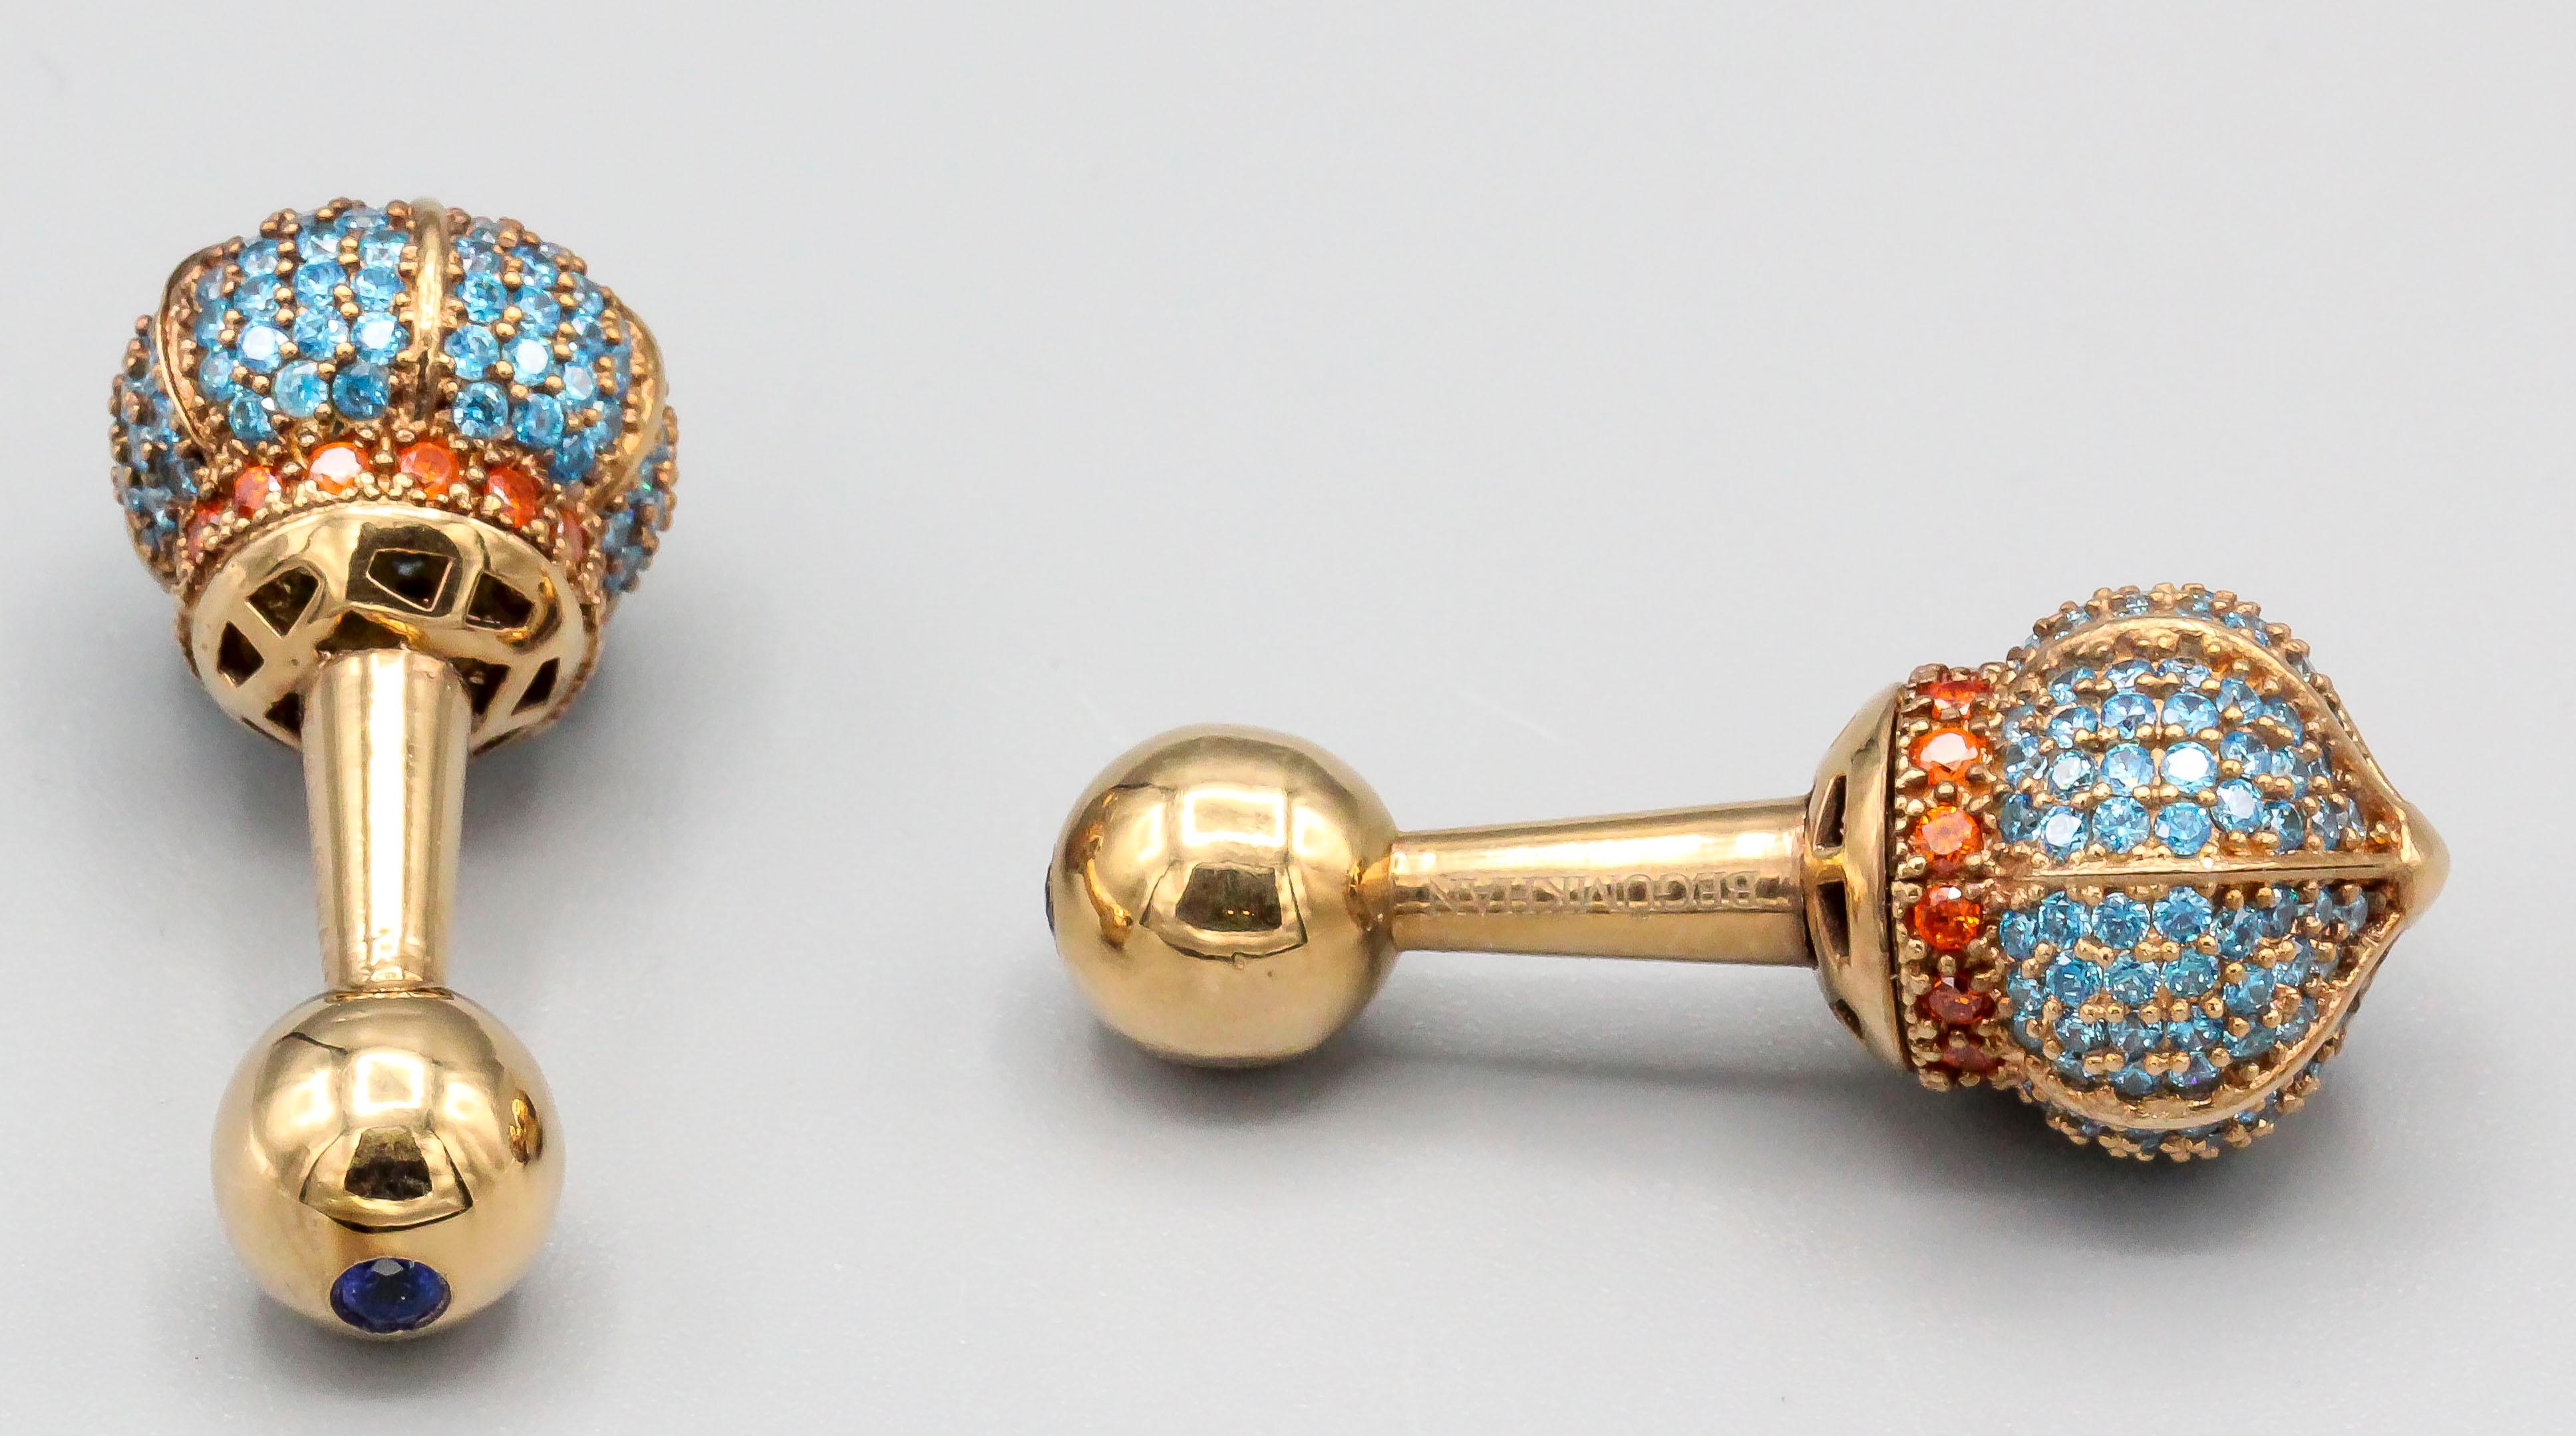 Very fine pair of 18k gold and multi-colored stone dumbbell cufflinks by Begum Khan. The cufflinks feature a scepter like design pave set with colored stones, which appear to be tourmalines and garnets but have not been tested, with the opposite end